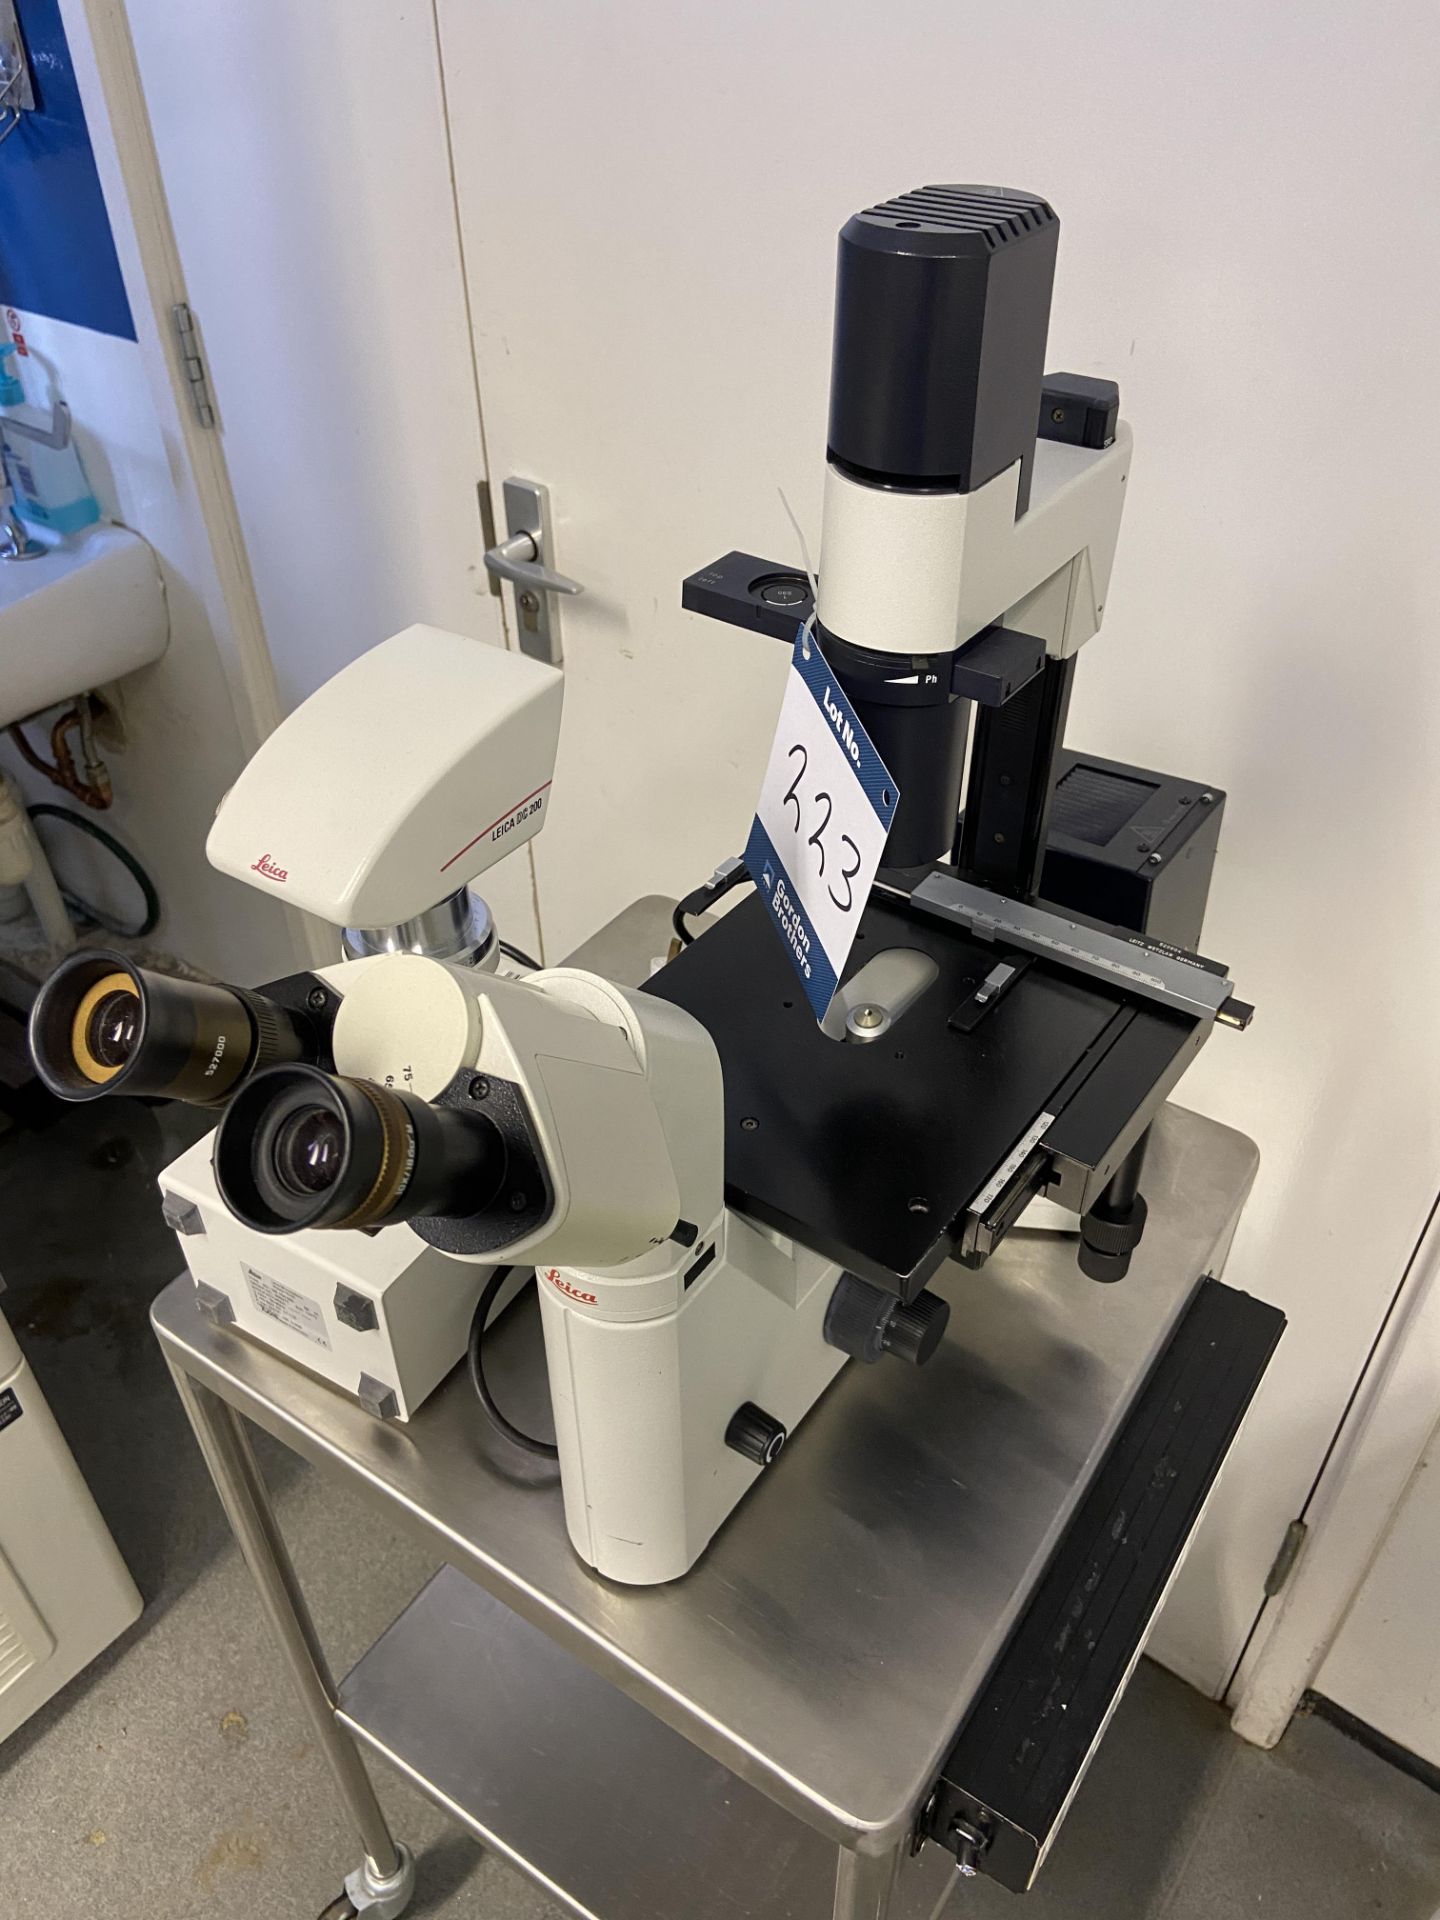 Leica DMIL type. 090-135.002, benchtop microscope with (4) Leica Optics including; ∞ / 0.2 C Plan